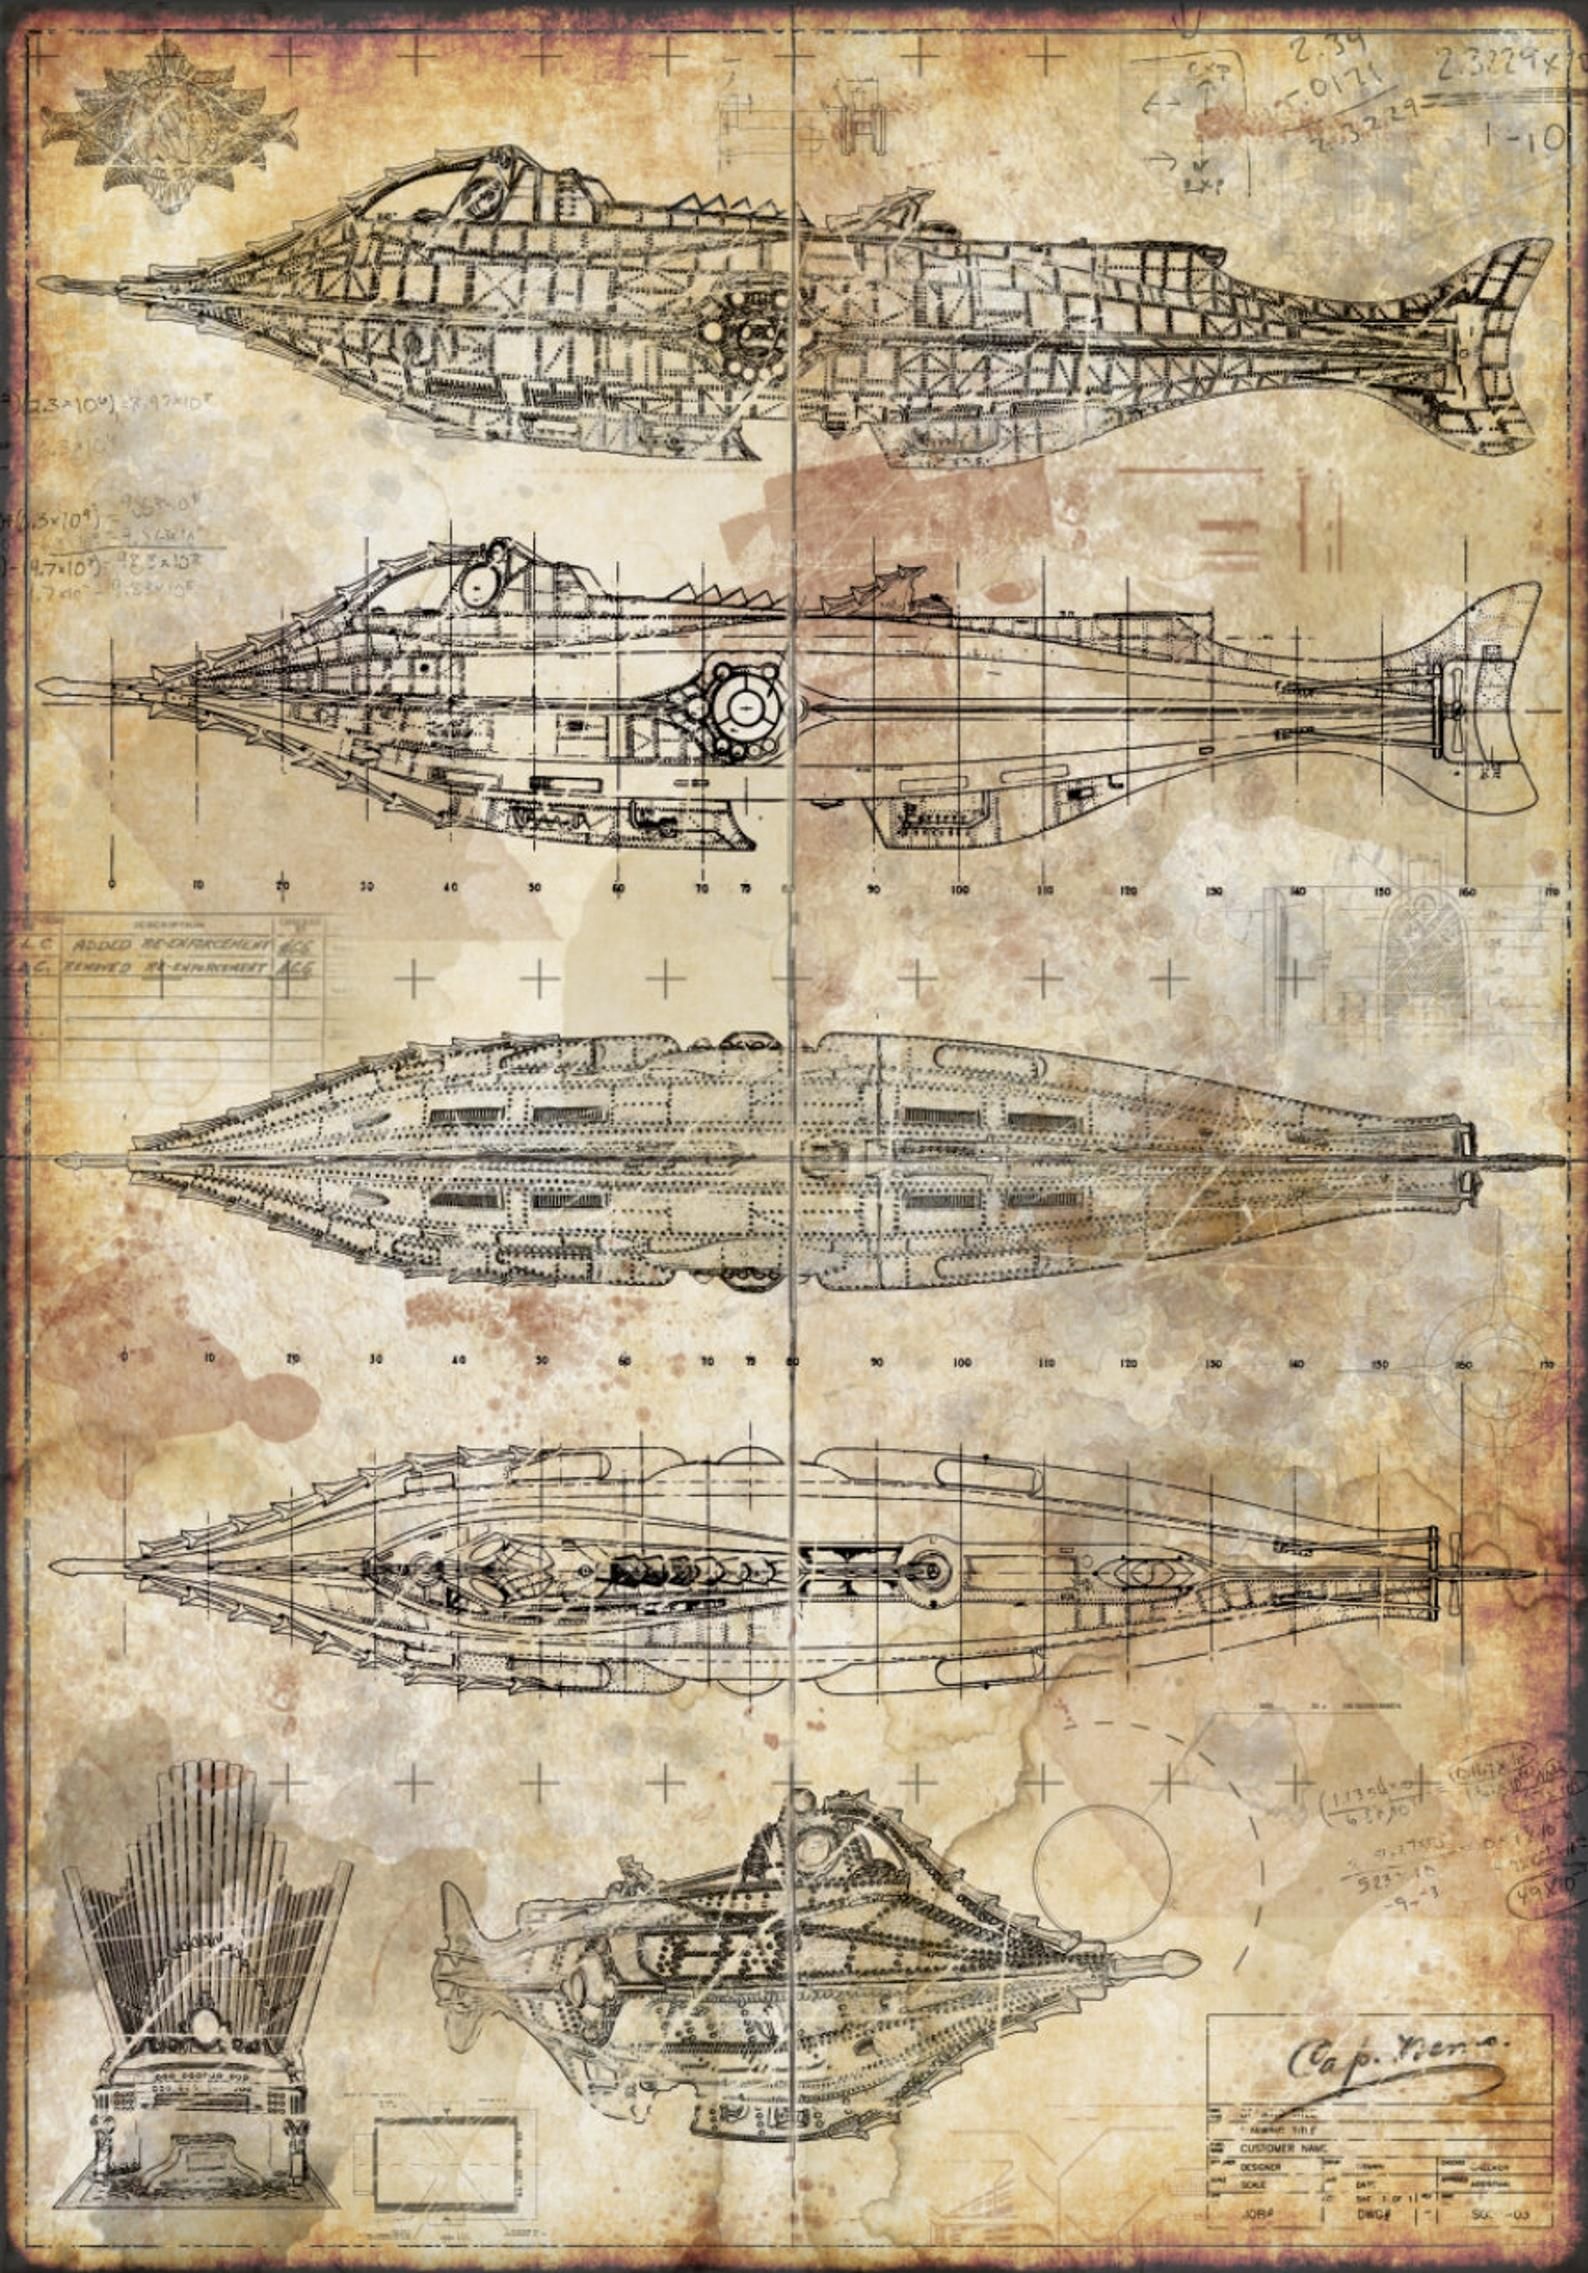 Jules Verne, 20,000 Leagues Under the Sea, The Nautilus, Mysterious Depths, 1590x2280 HD Handy